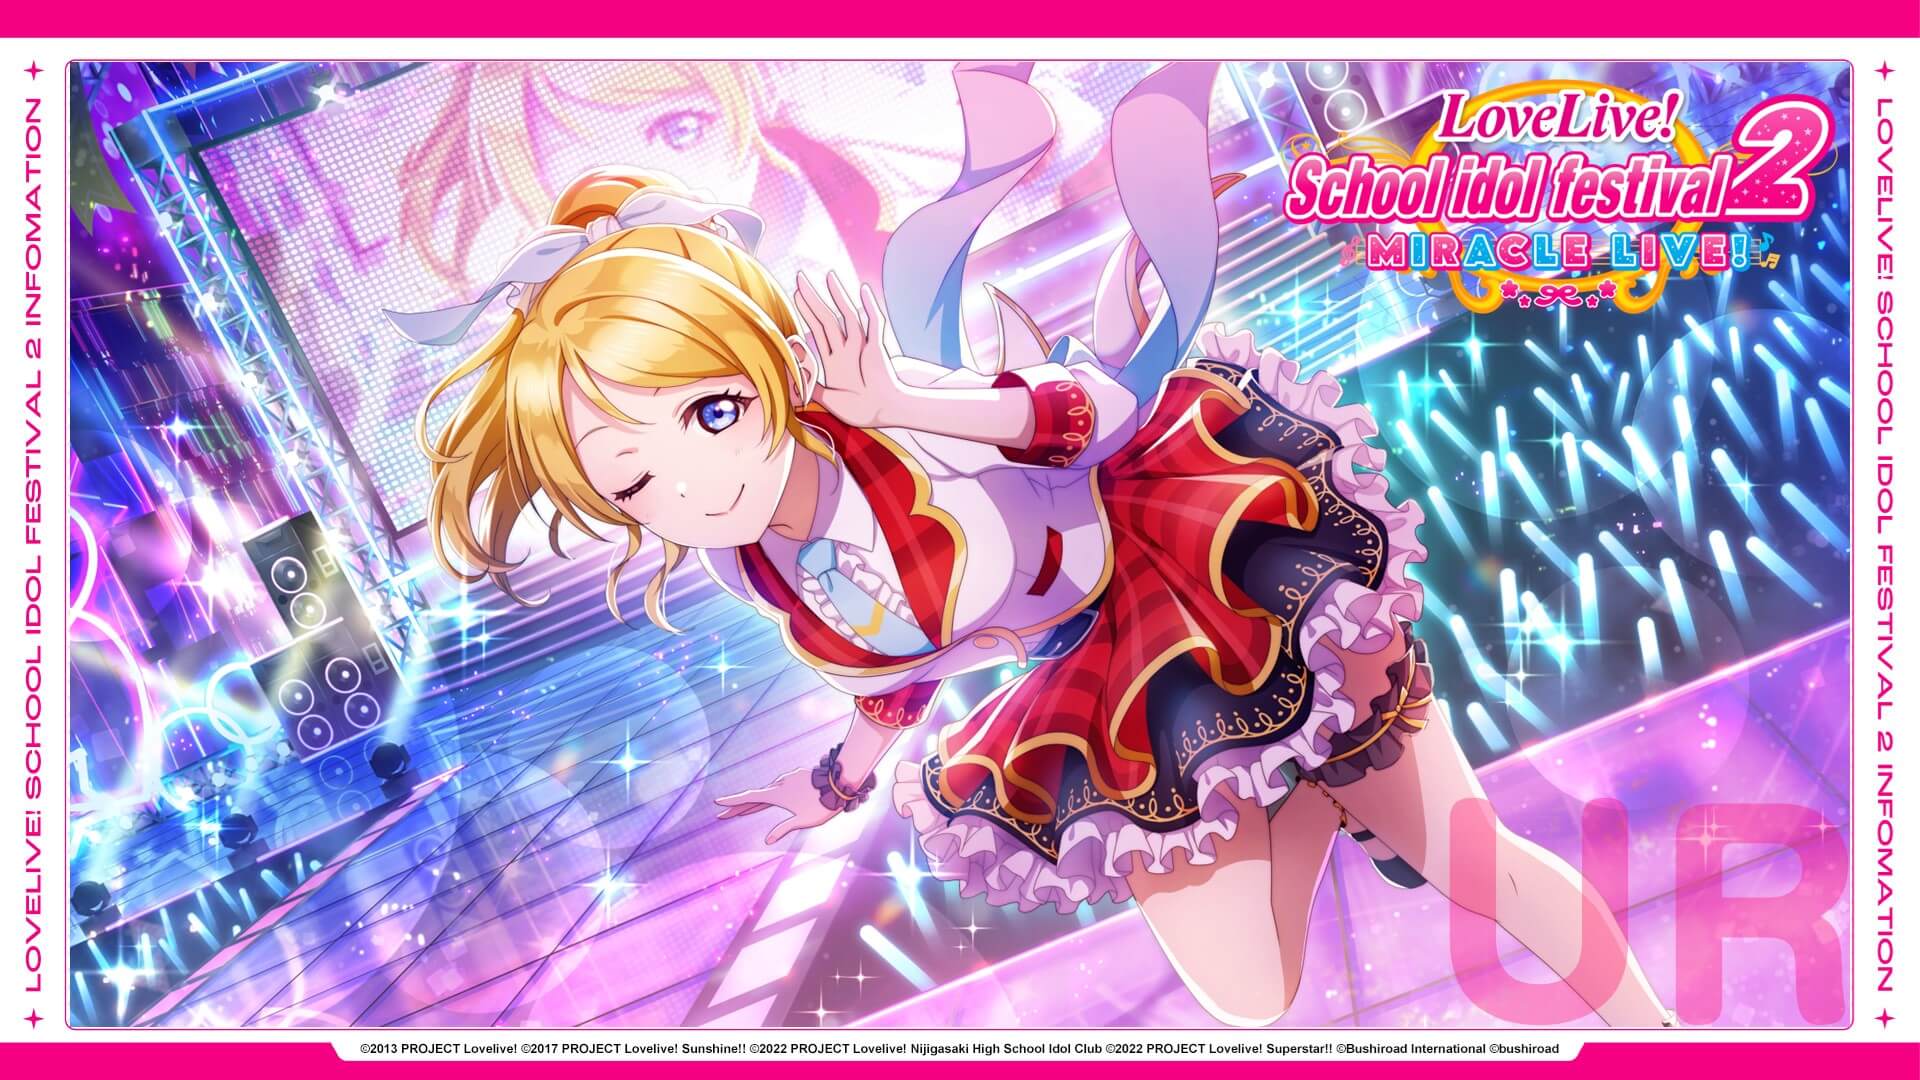  Love Live! School idol festival 2 global launching, shutting down later this year